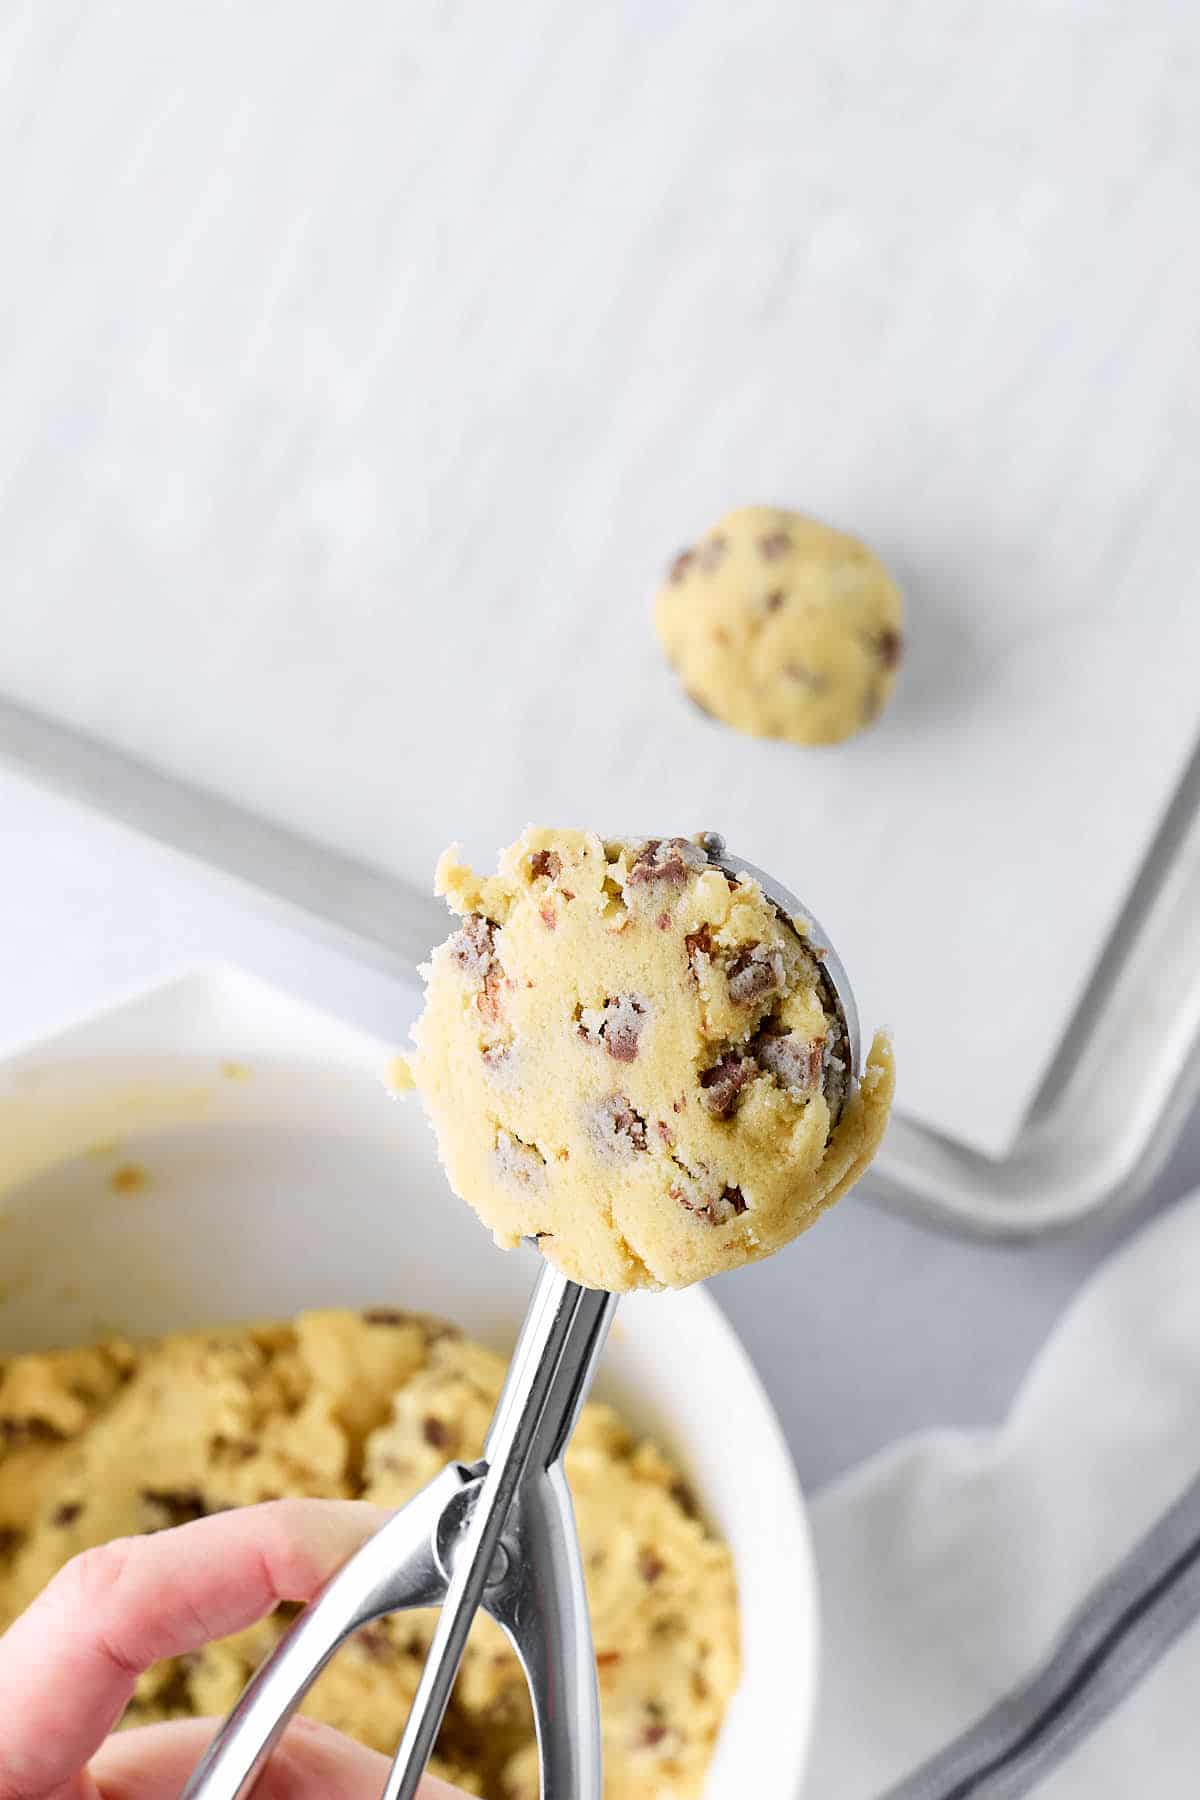 Cookie scoop of chocolate chip cookie dough.